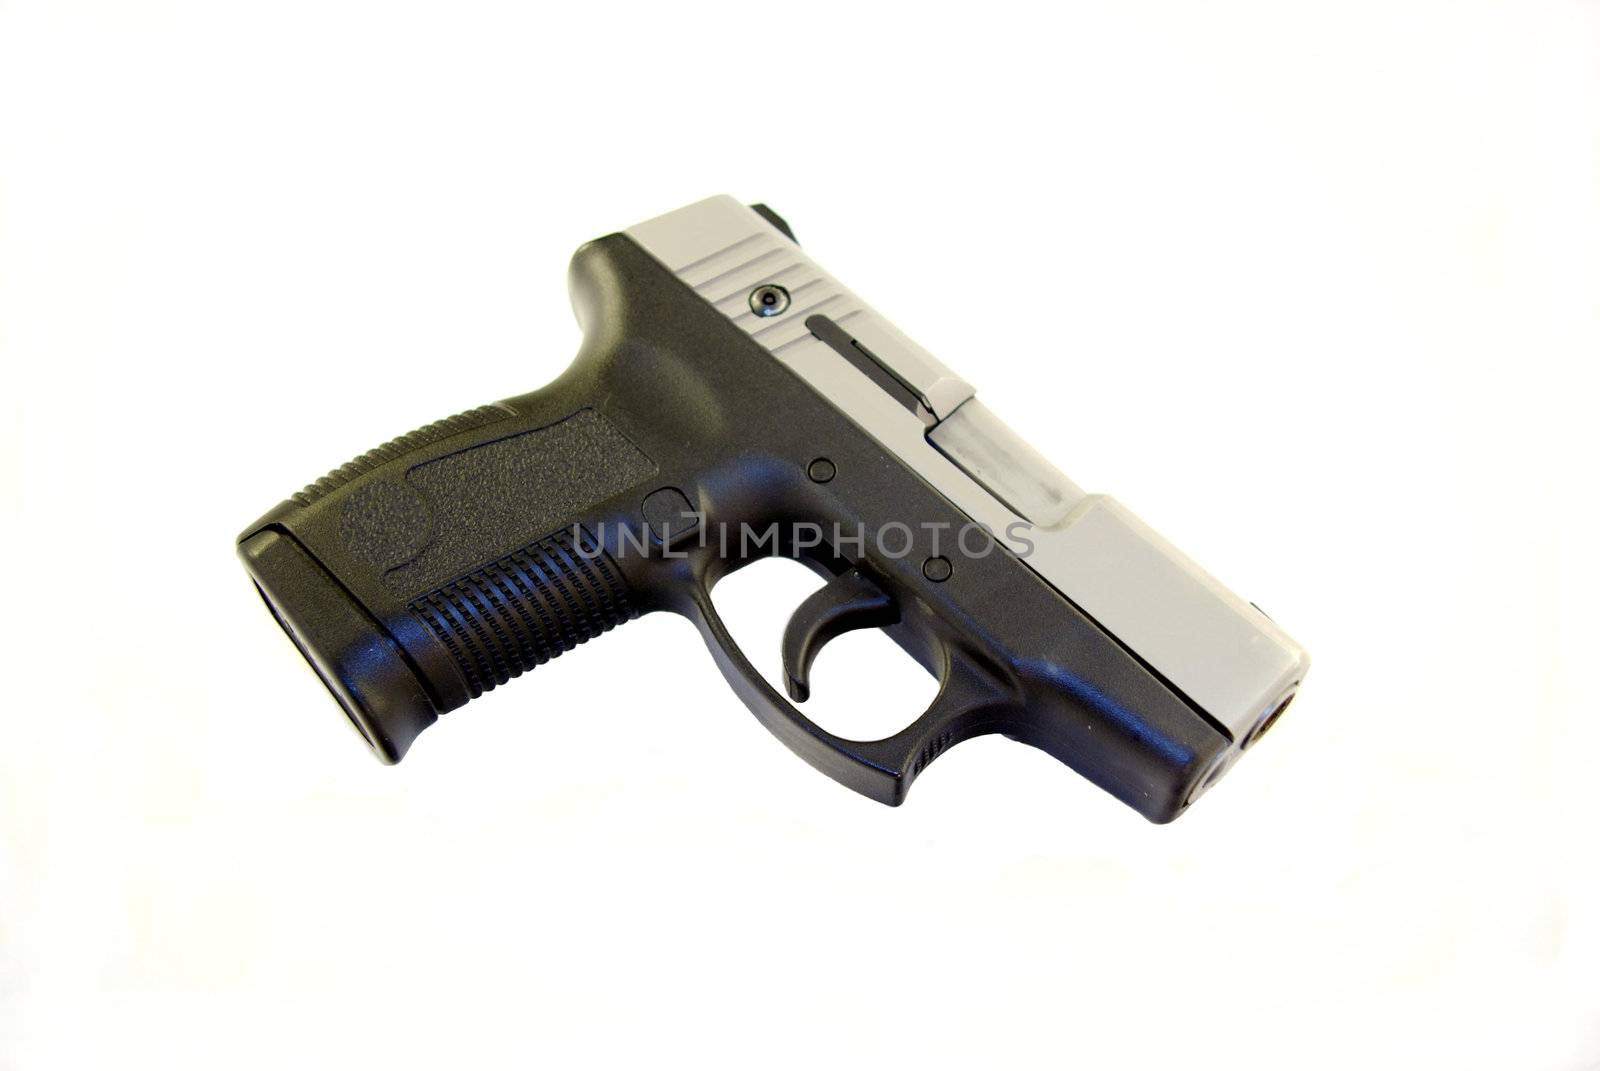 .45 caliber semi-auto pistol, black and stainless steel color on a white bcakground